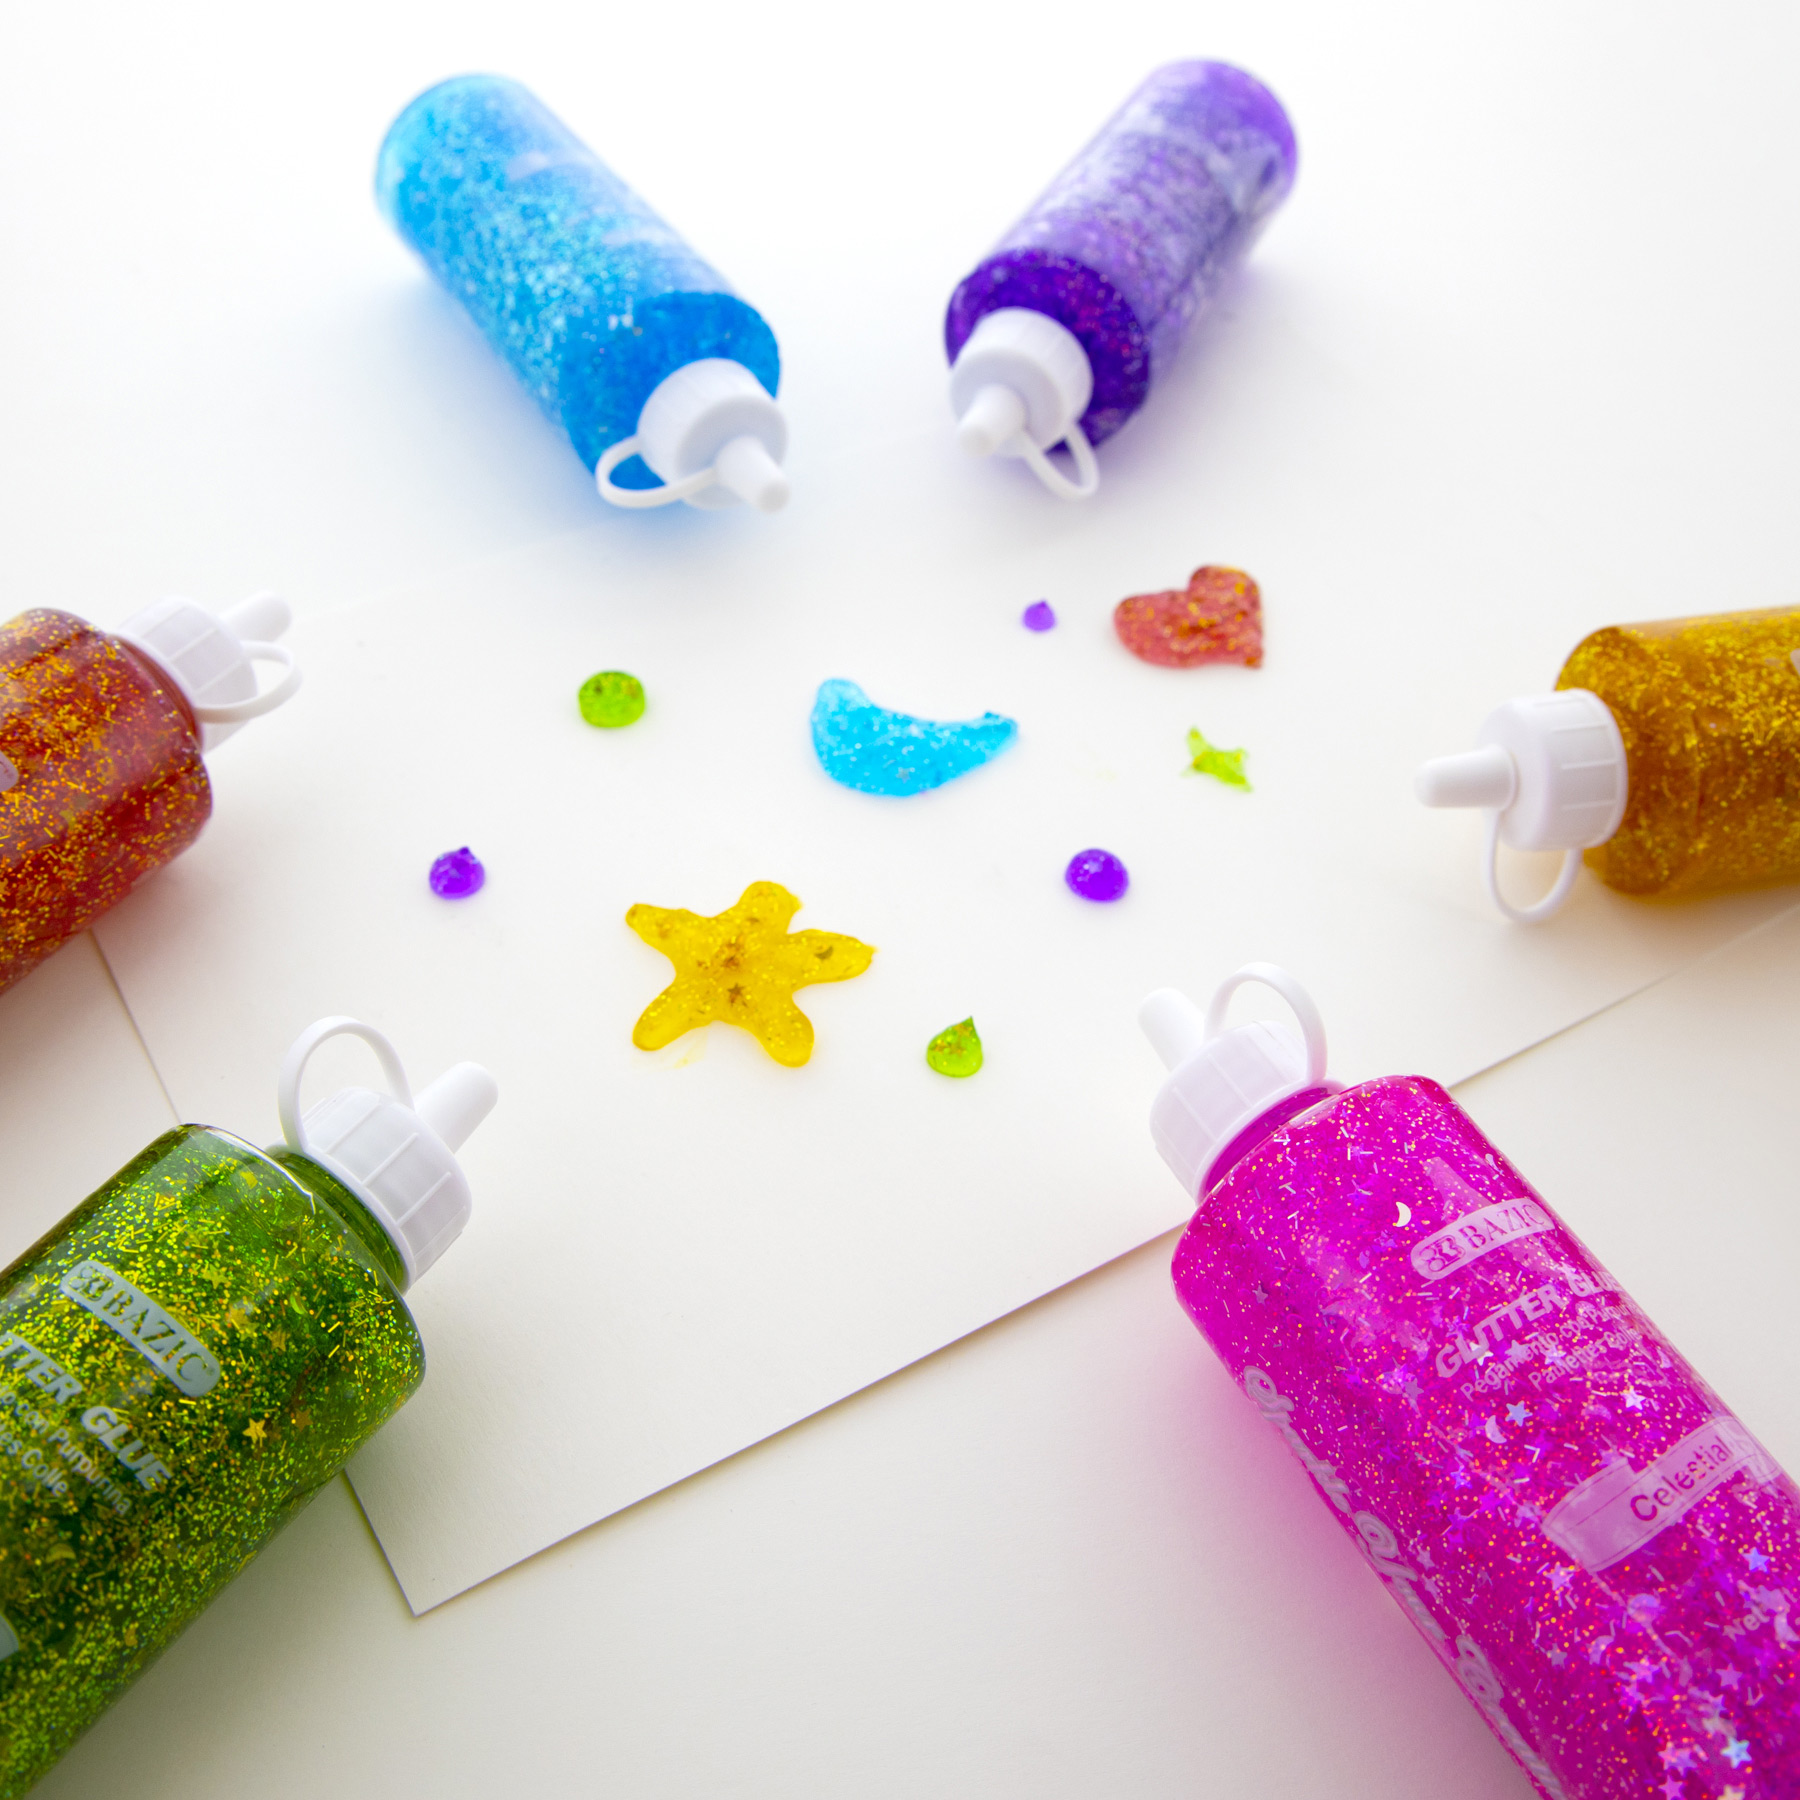 Glitter Glue (Value Pack - 24 Colors), Washable Glittery Art Glue, Essential Slime Supplies for Slime Making and Arts & Crafts Projects